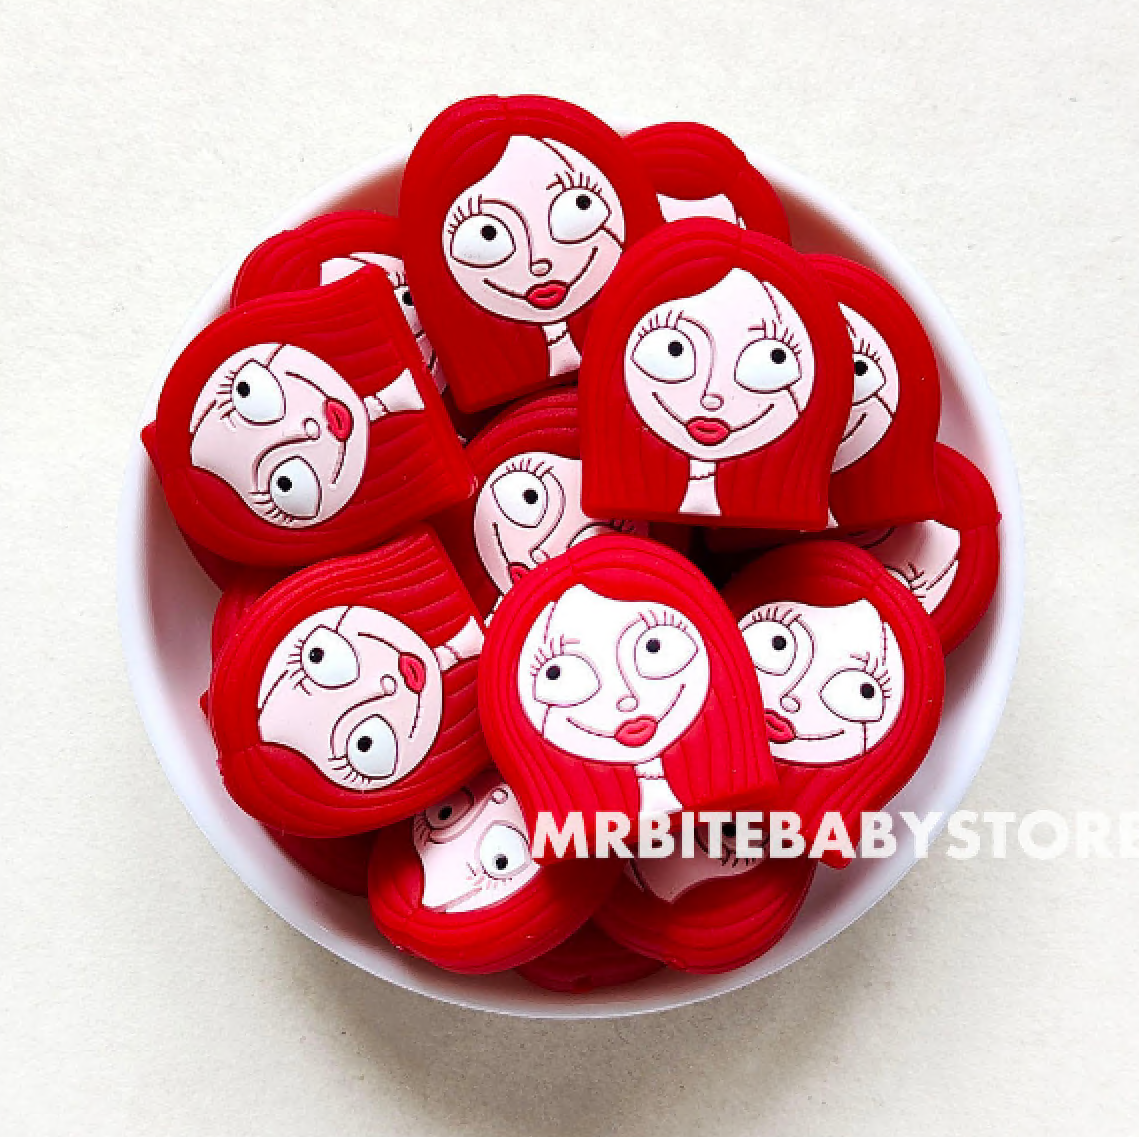 Halloween Patches Doll Silicone Beads - 30*27mm